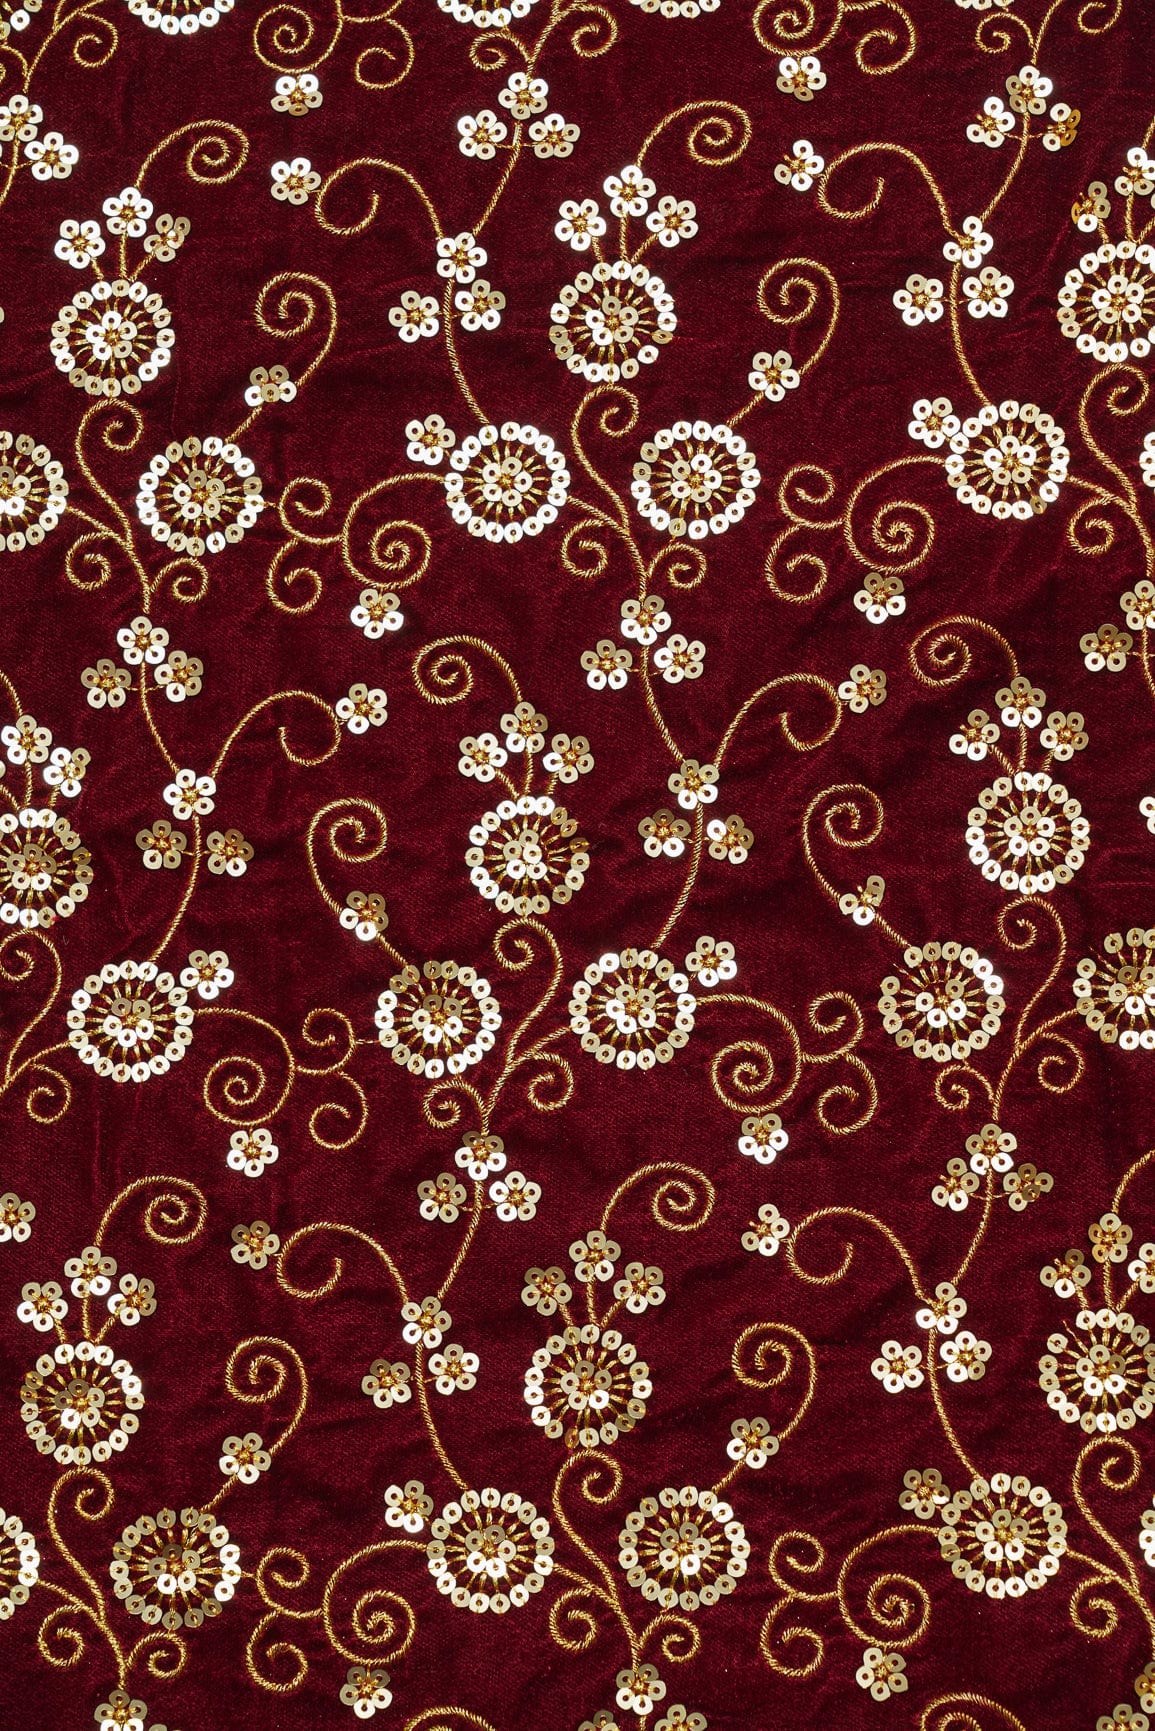 doeraa Embroidery Fabrics Gold Sequins With Gold Thread Embroidery On Maroon Velvet